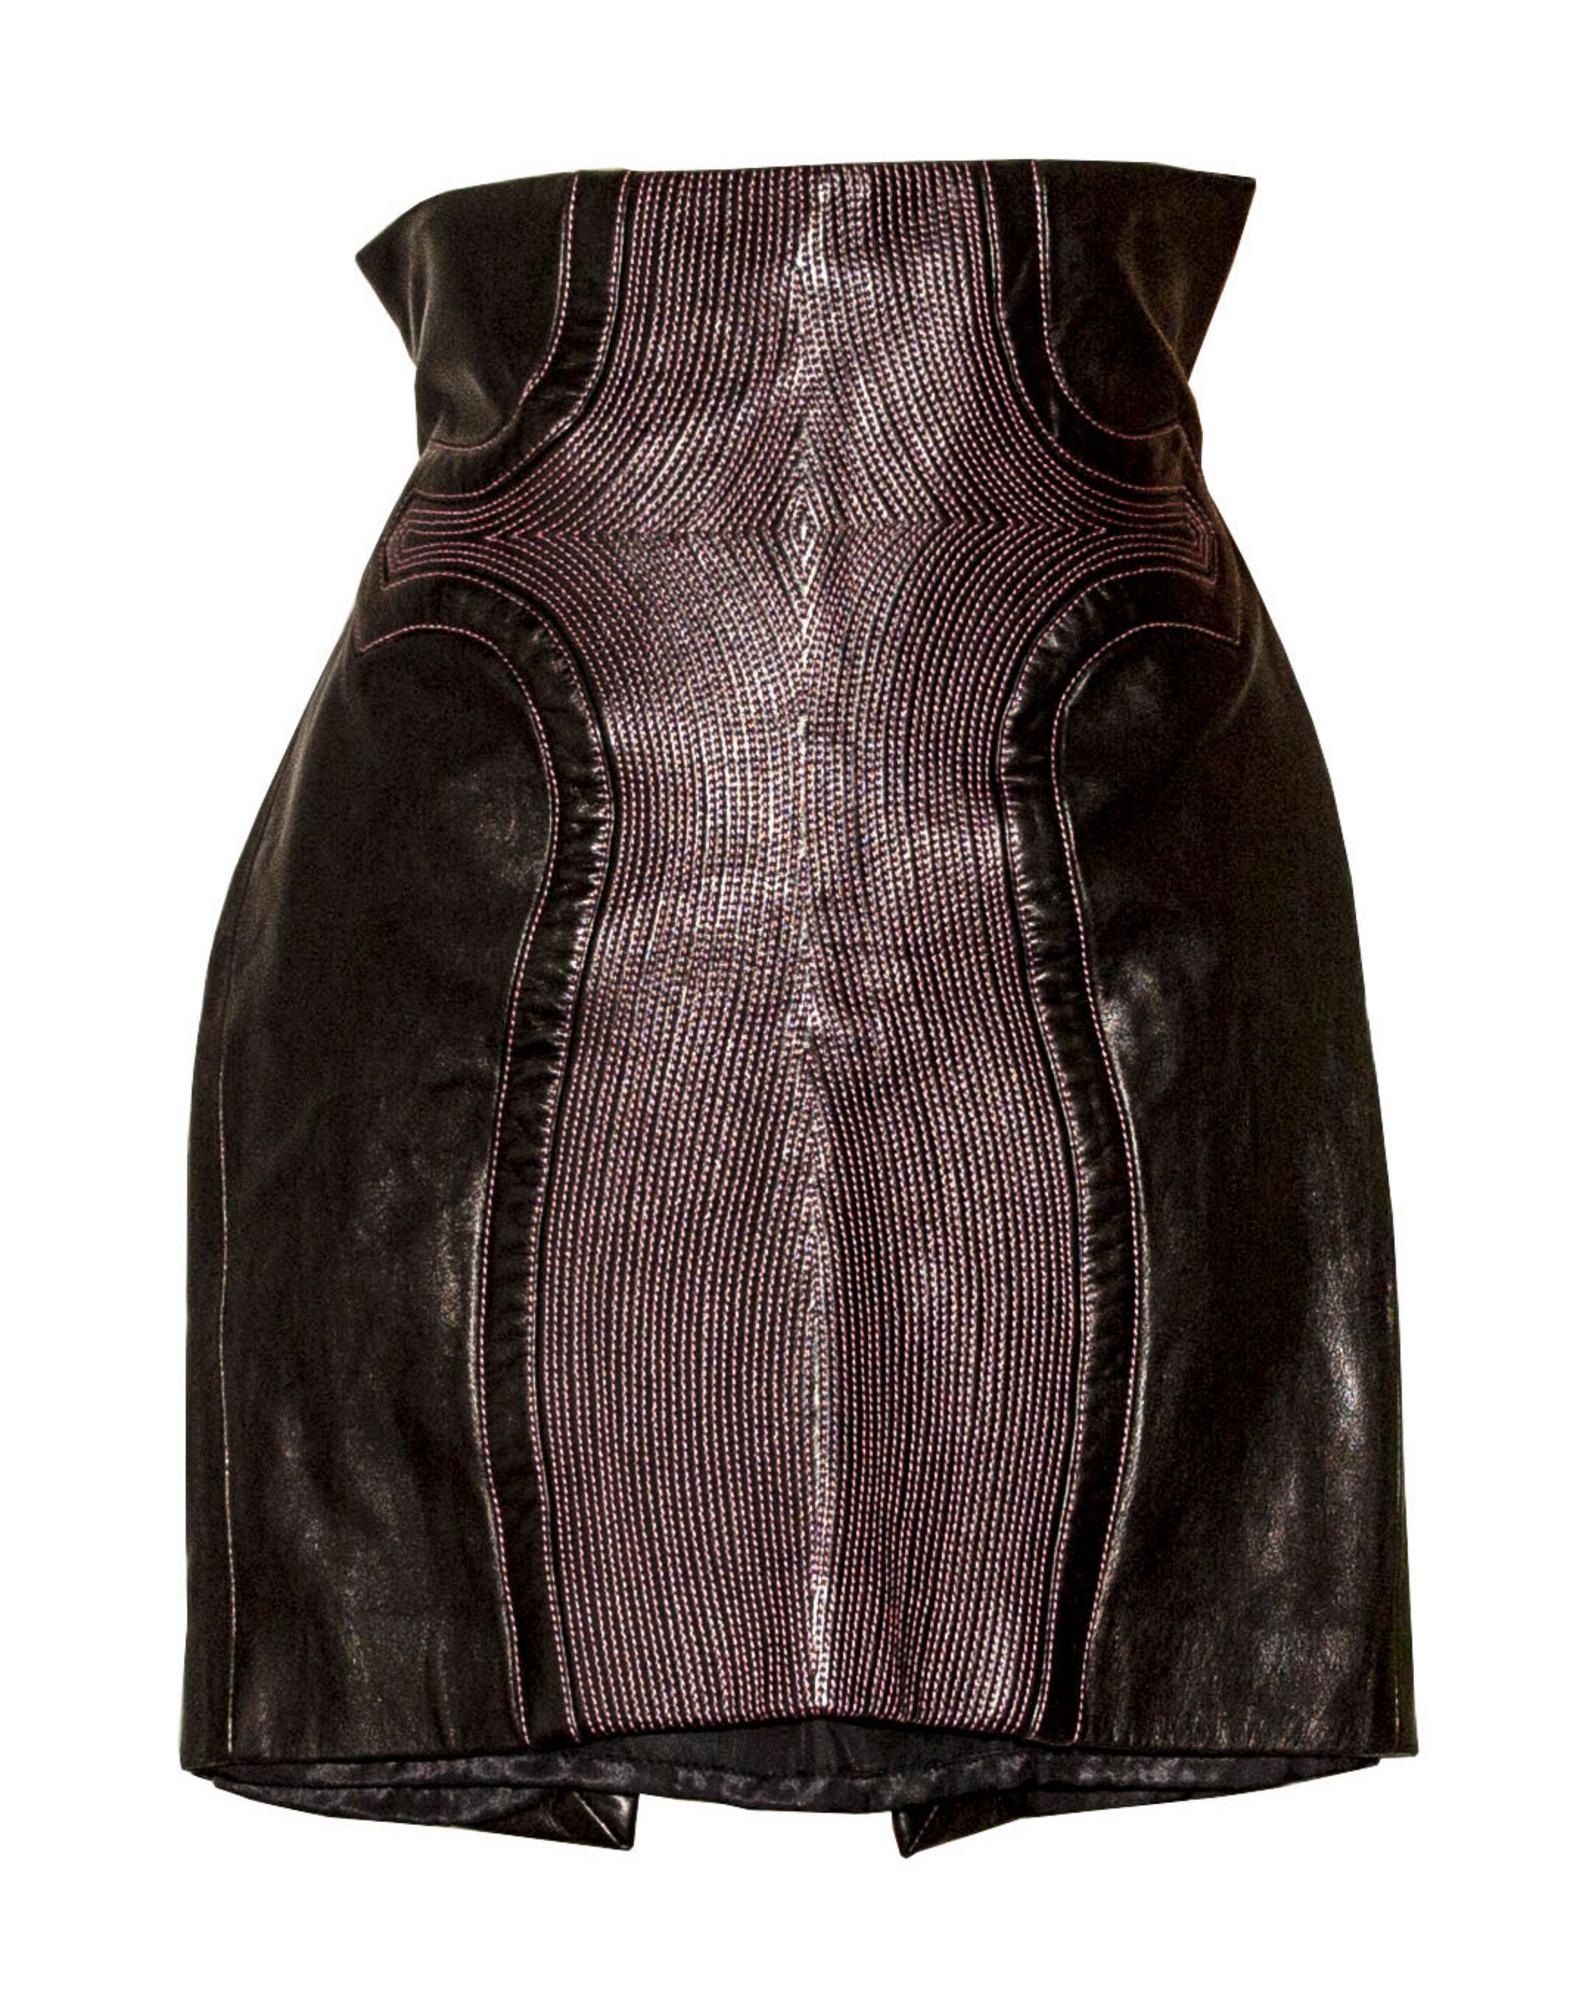 Versace LEATHER SKIRT Description: Black leather skirt with pink top...